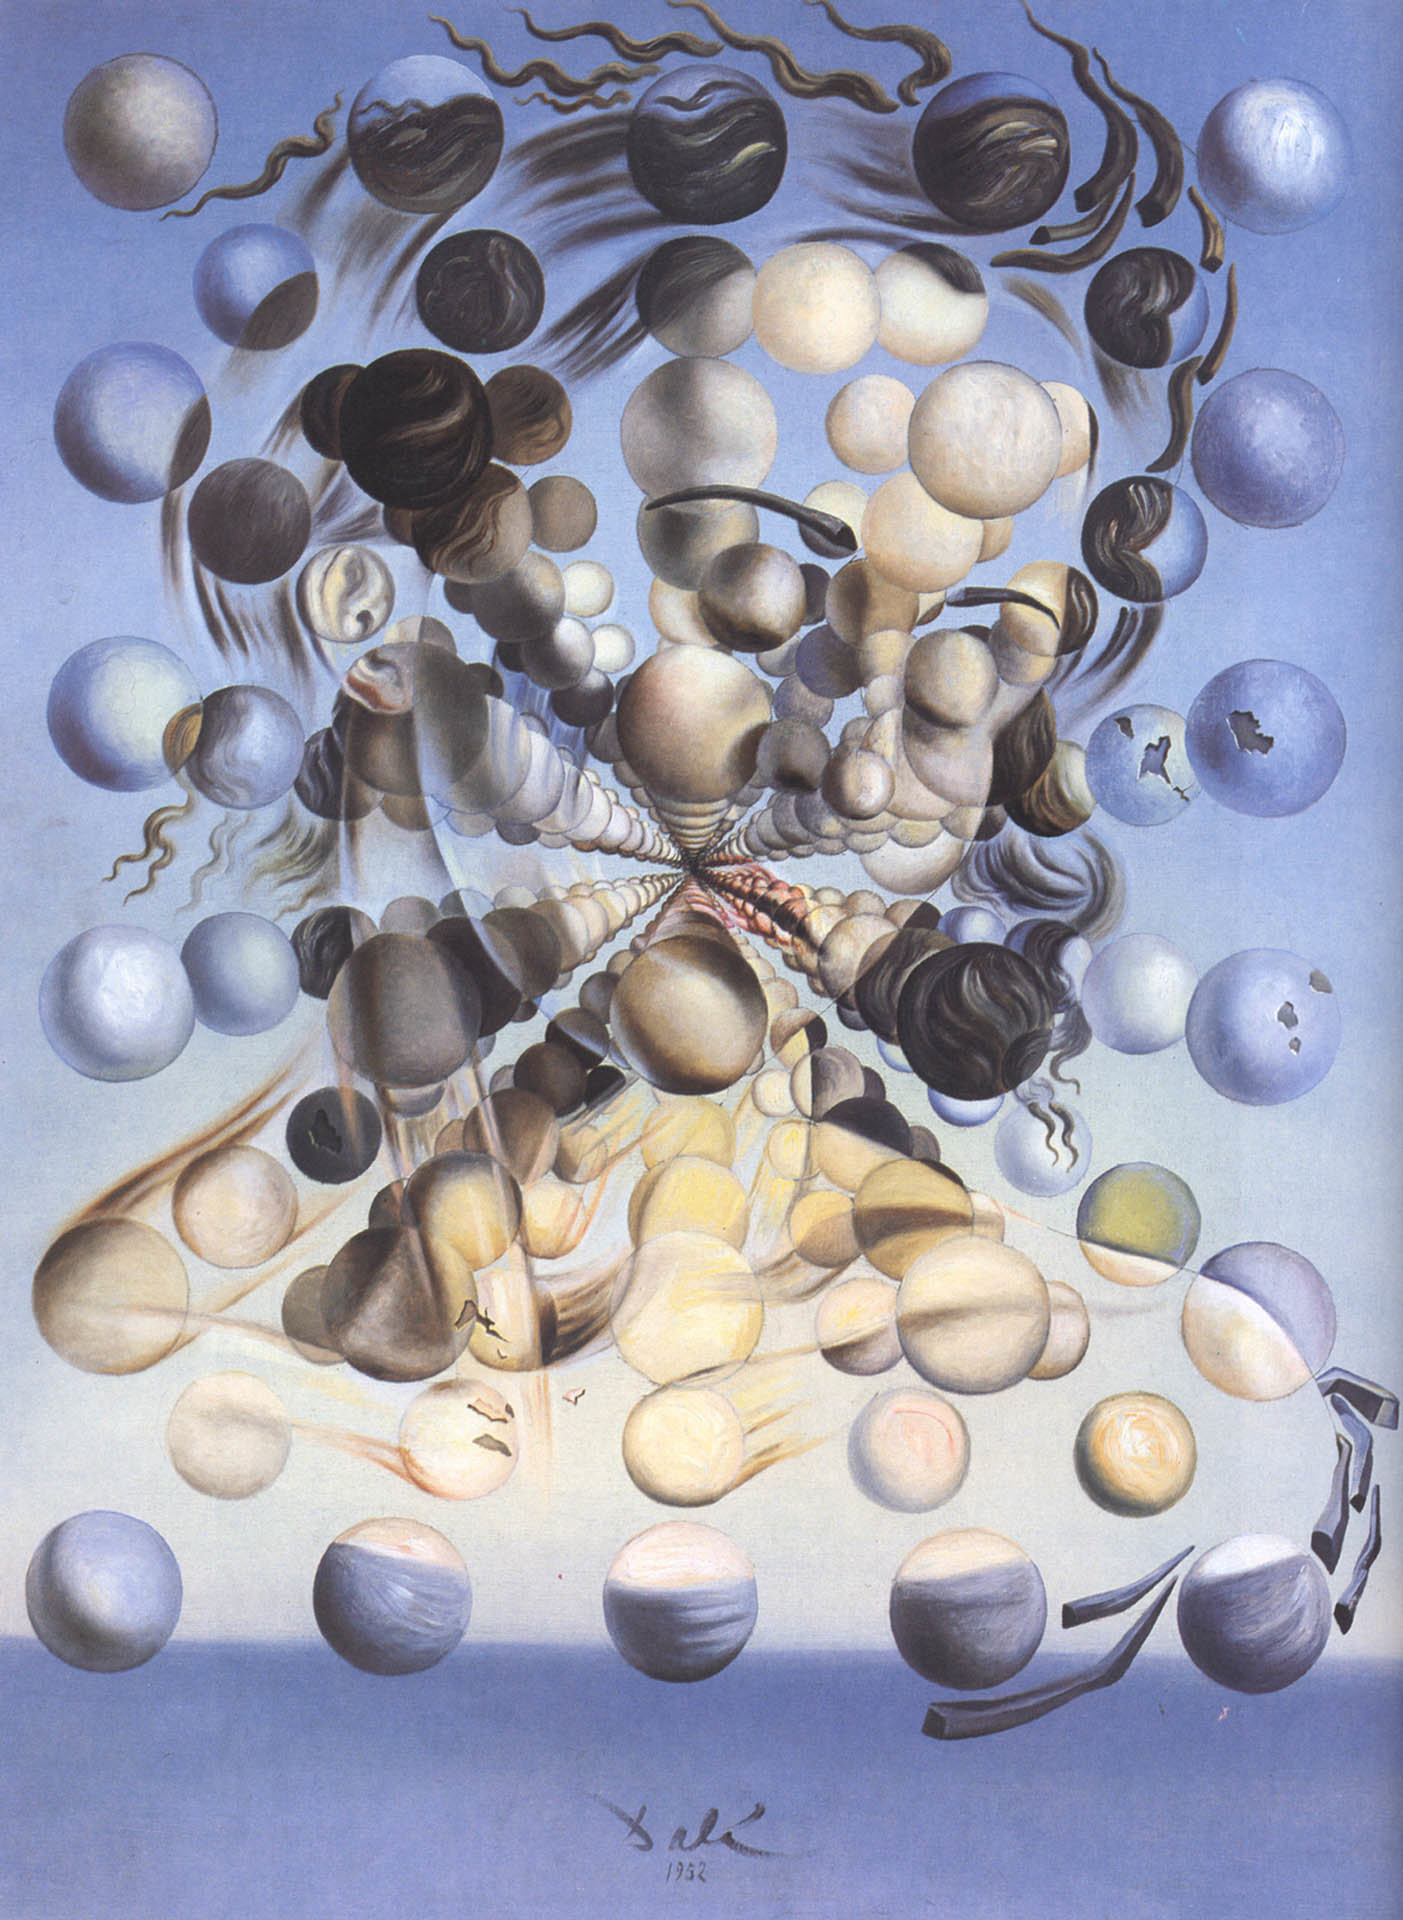 Salvador Dali, Galatea of the spheres, 1952, oil on canvas,